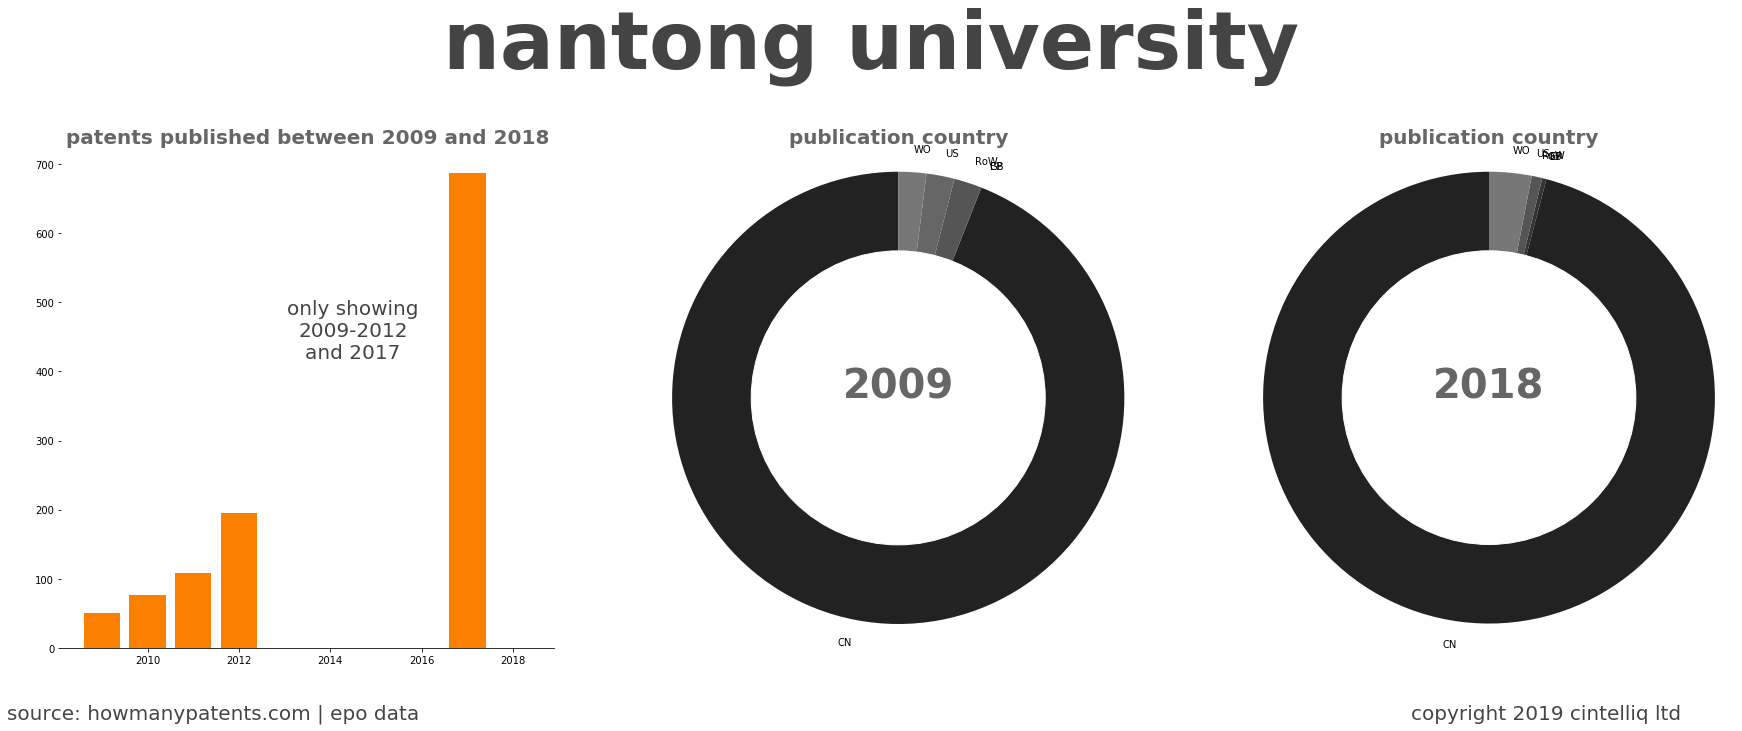 summary of patents for Nantong University